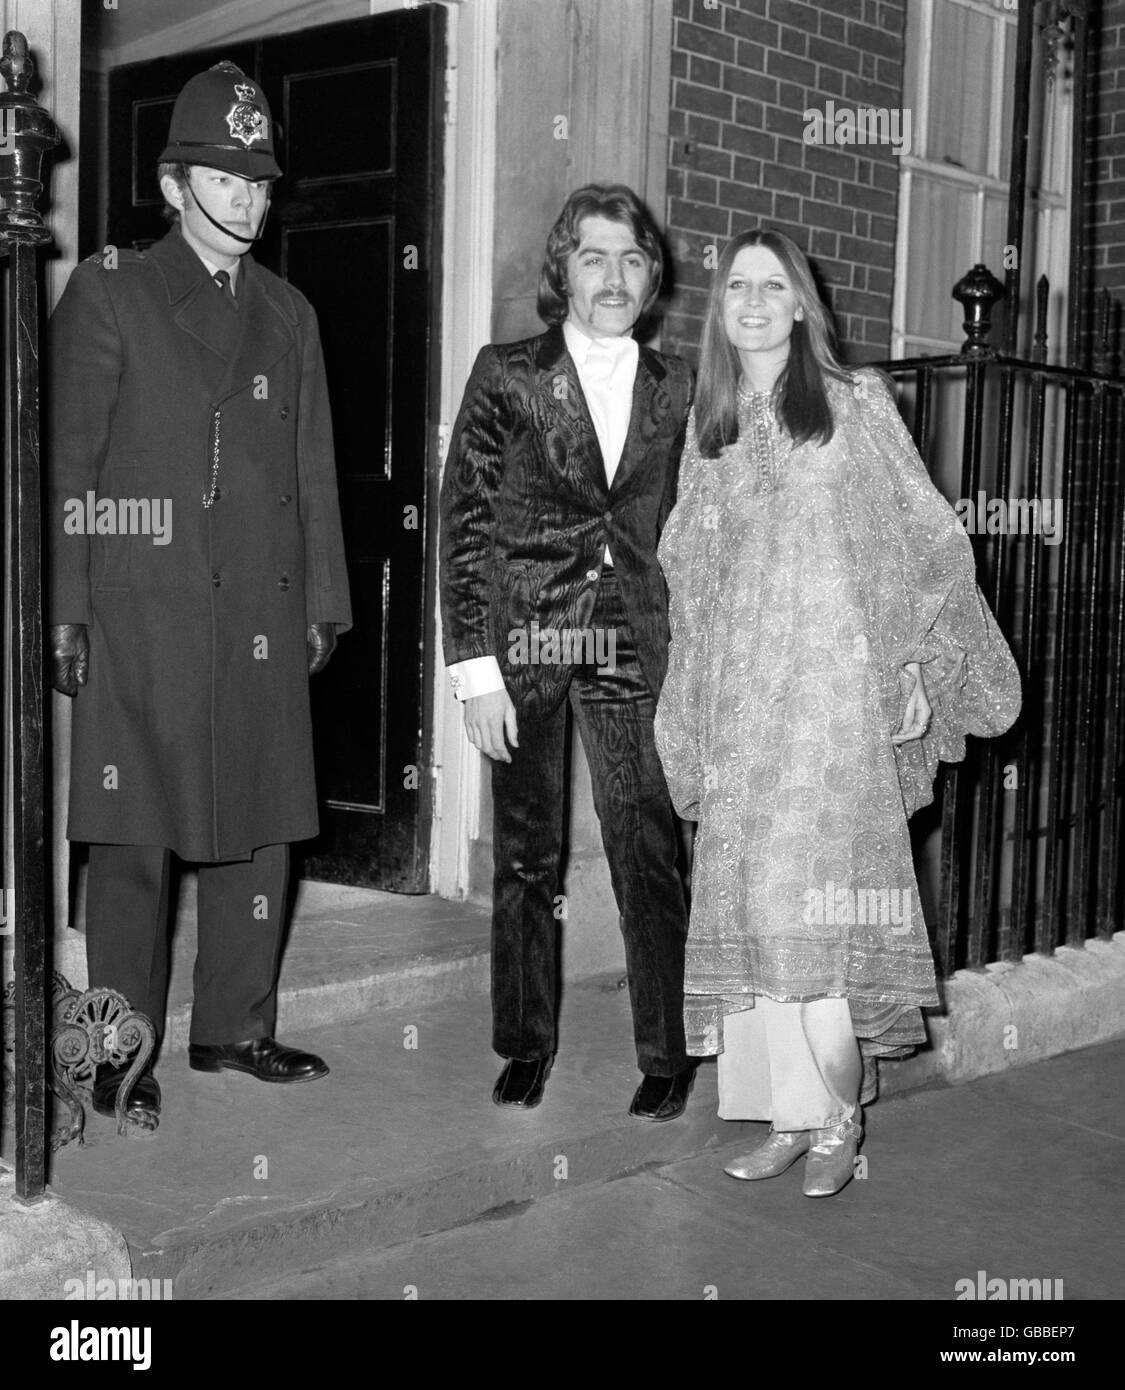 Singer Sandie Shaw and her husband Jeff Banks, arrive at 10 Downing Street for the reception given by the Prime Minister for Willy Brandt. The West German Chancellor was given the opportunity to meet not only political people but personalities from the world of sport, entertainment and industry. Stock Photo